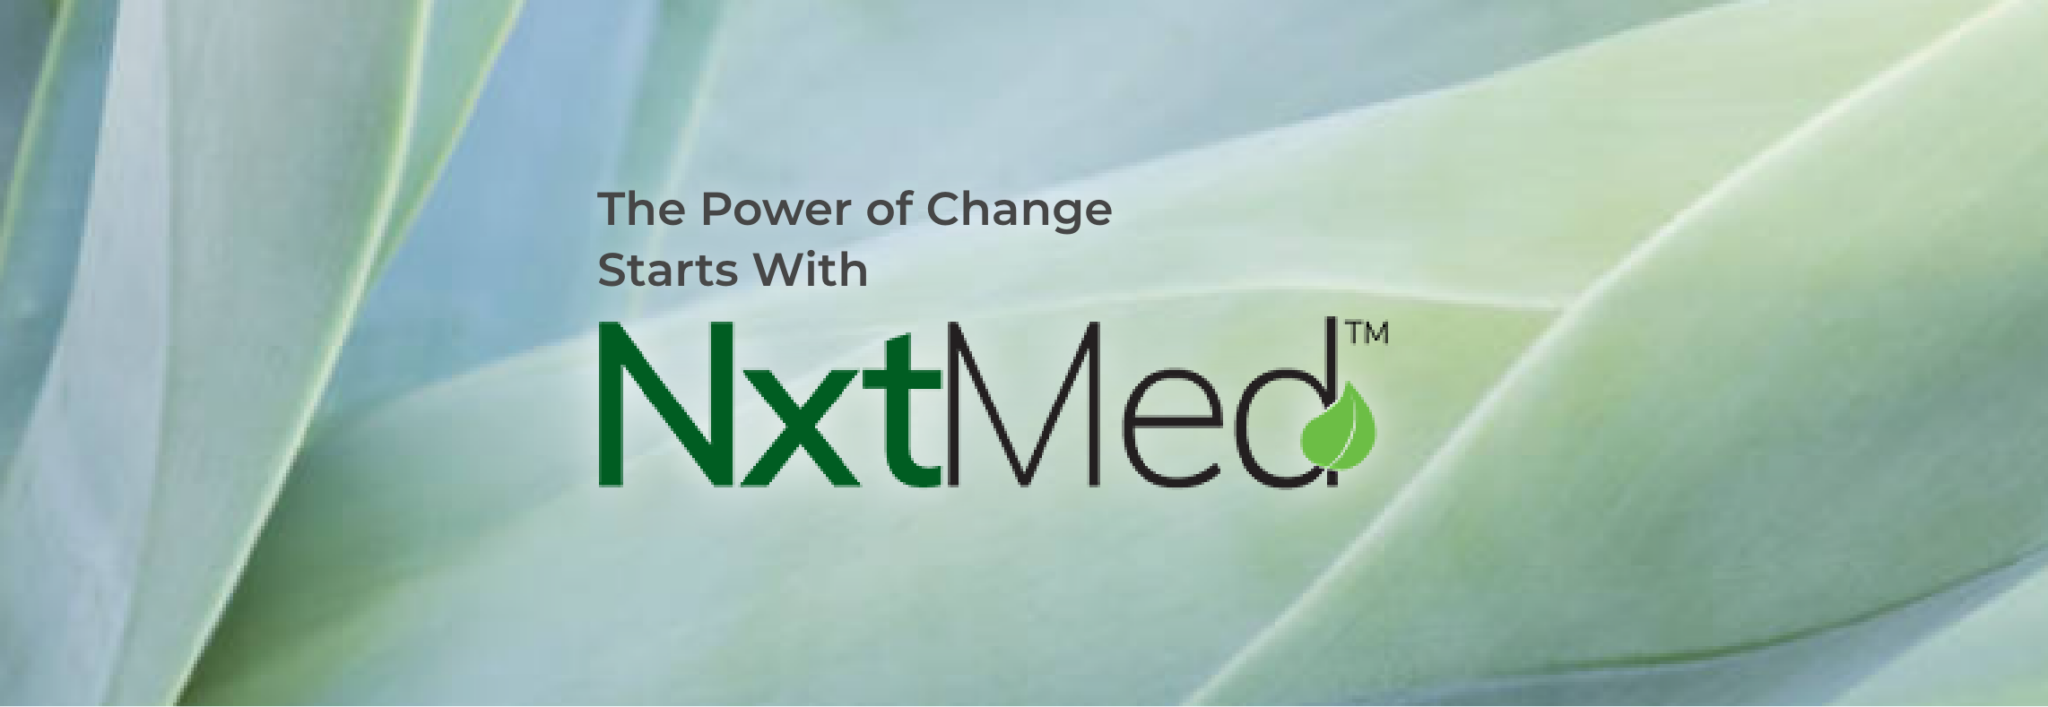 The power of change starts with NxtMed